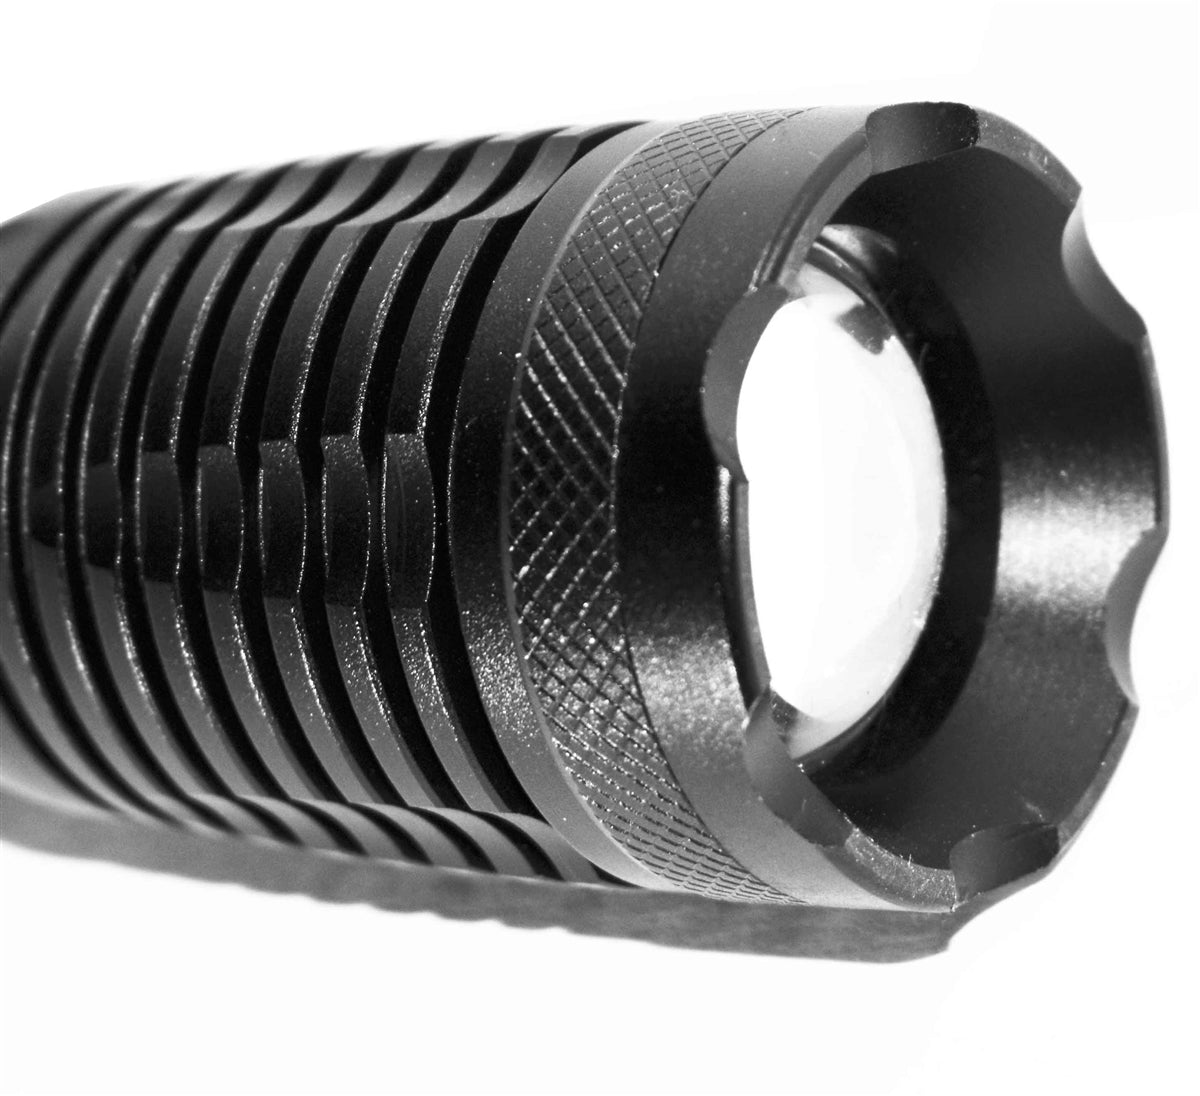 hunting tactical flashlight for rifles.